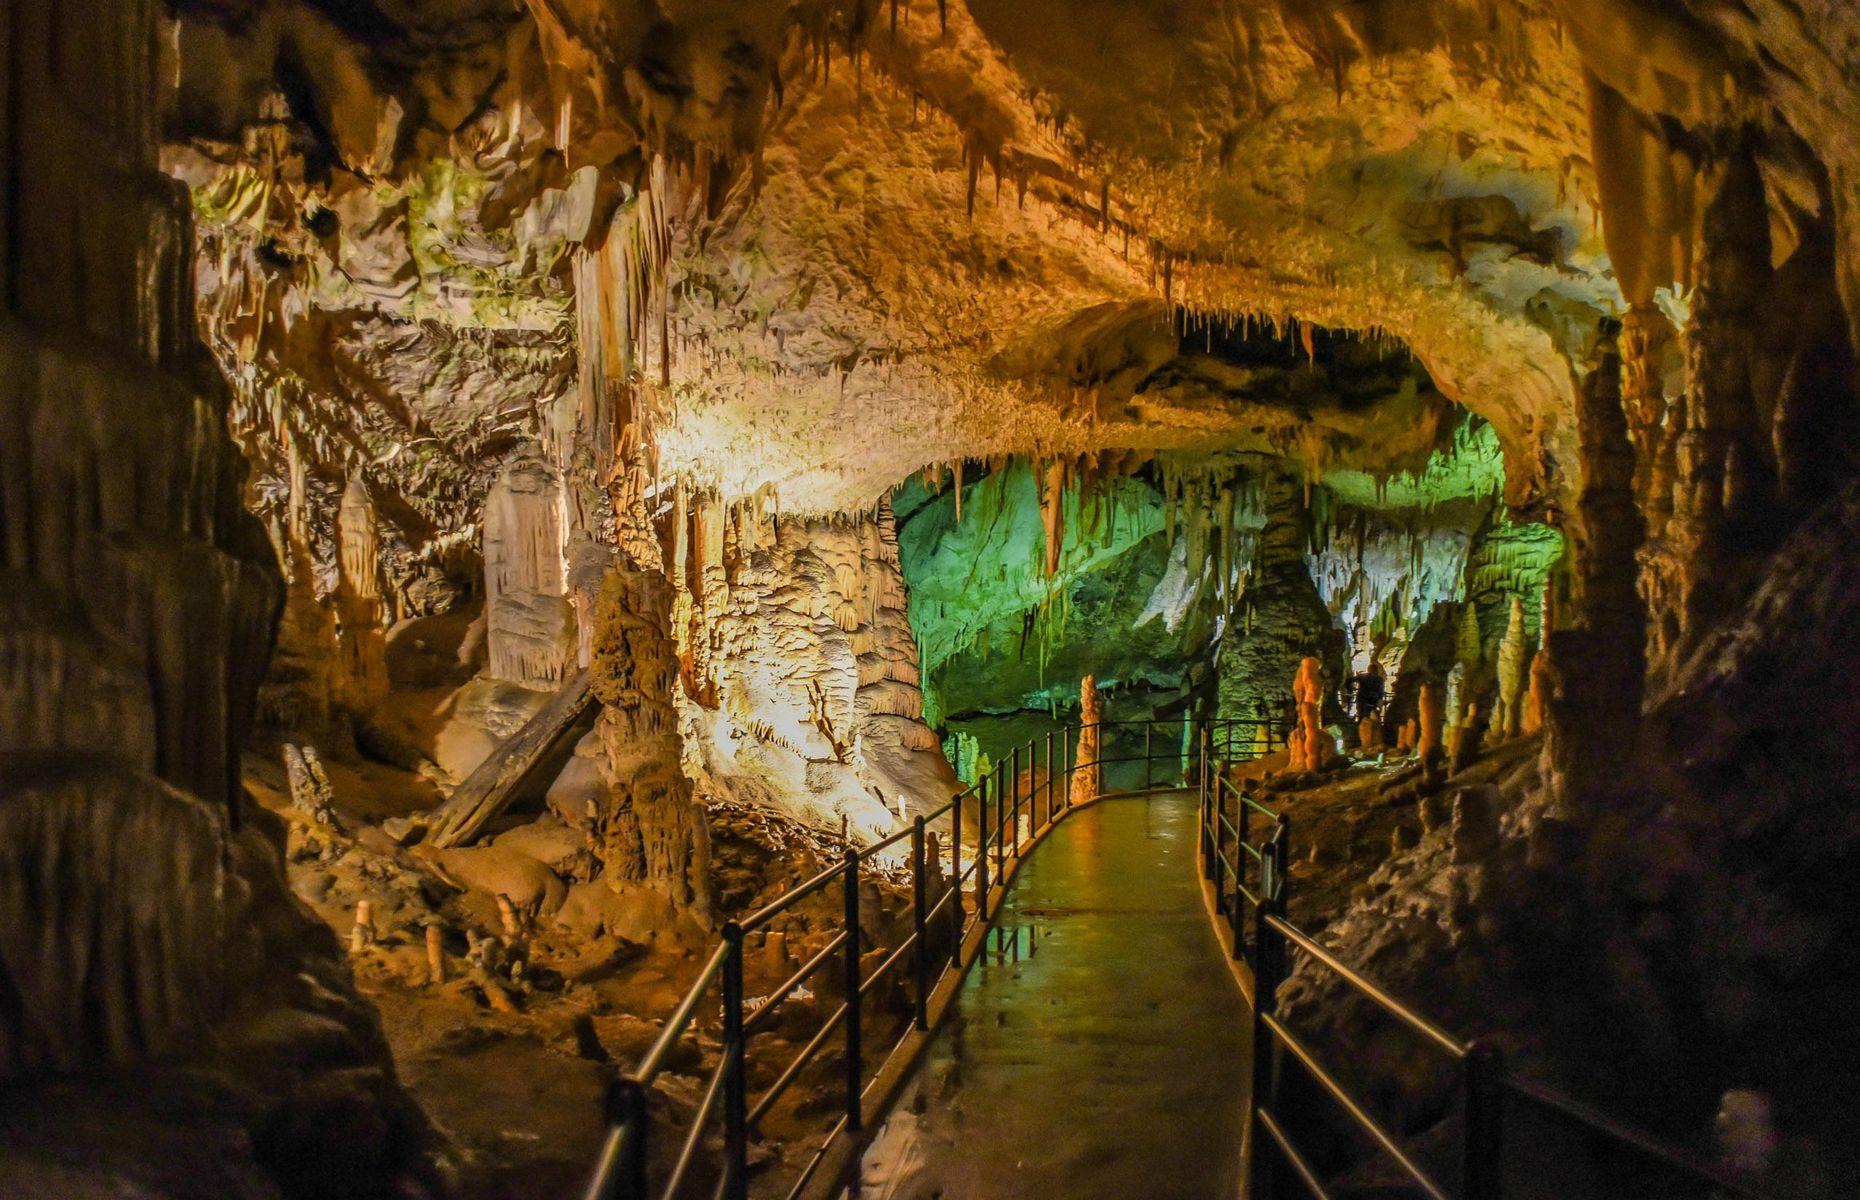 <p>The 15-mile (24km) <a href="https://www.postojnska-jama.eu/en/">Postojna Caves</a> are arguably some of the most spectacular in the world. If you bring the family here, not only do you get to explore an ethereal, magical world, there’s an underground train ride which makes getting about the caves with tired, little legs very easy. The train passes between two-million-year-old stalactites, each stone structure seeming more amazing than the last. If your kids are eagle-eyed, they might spot the ‘baby dragons’ (which are actually 'olms', a reptile resembling a dragon native only to this region). When you surface, take the kids to the world's largest cave castle, Predjama. Here, they'll be enthralled by tales of the rebellious knight Erazem – a real character from the 15th century. </p>